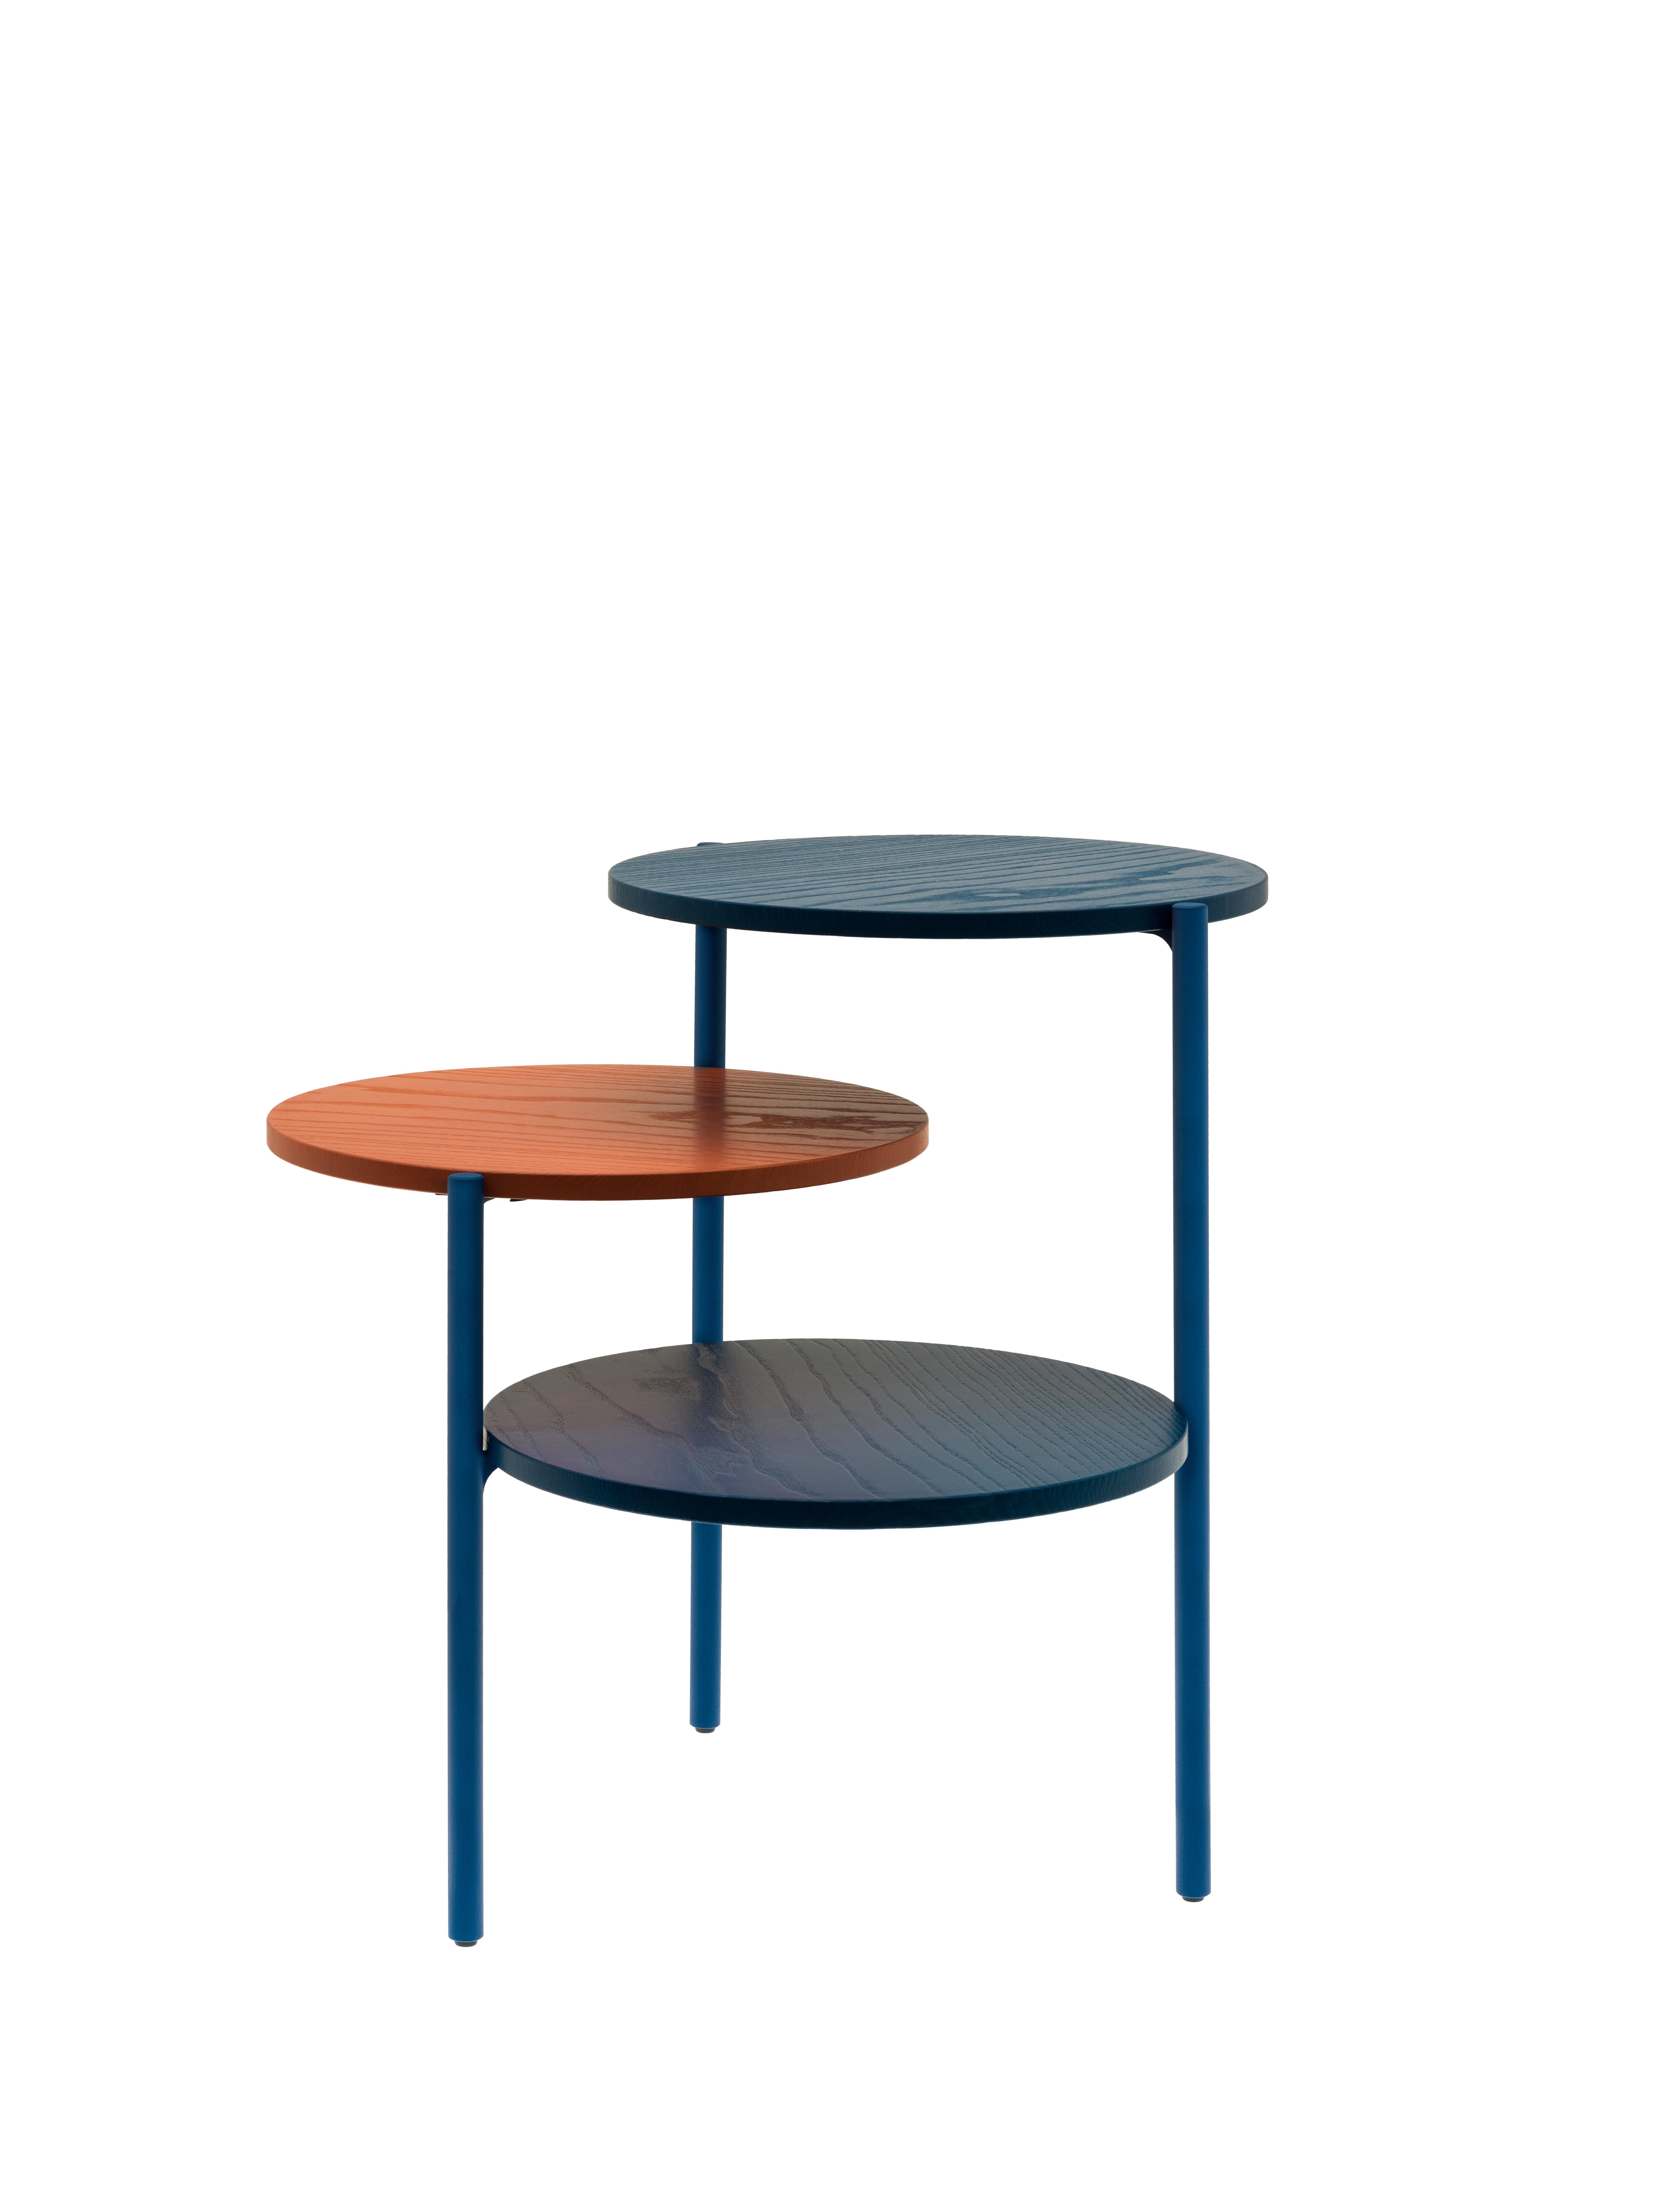 Blue & Coral triplo table by Mason Editions
Dimensions: 54 × 54 × 52.5 cm
Materials: iron, ash
Colours: total black, total blue, total light grey, blue + coral, black + light grey, light grey + pumpkin

This side table is based on the concept